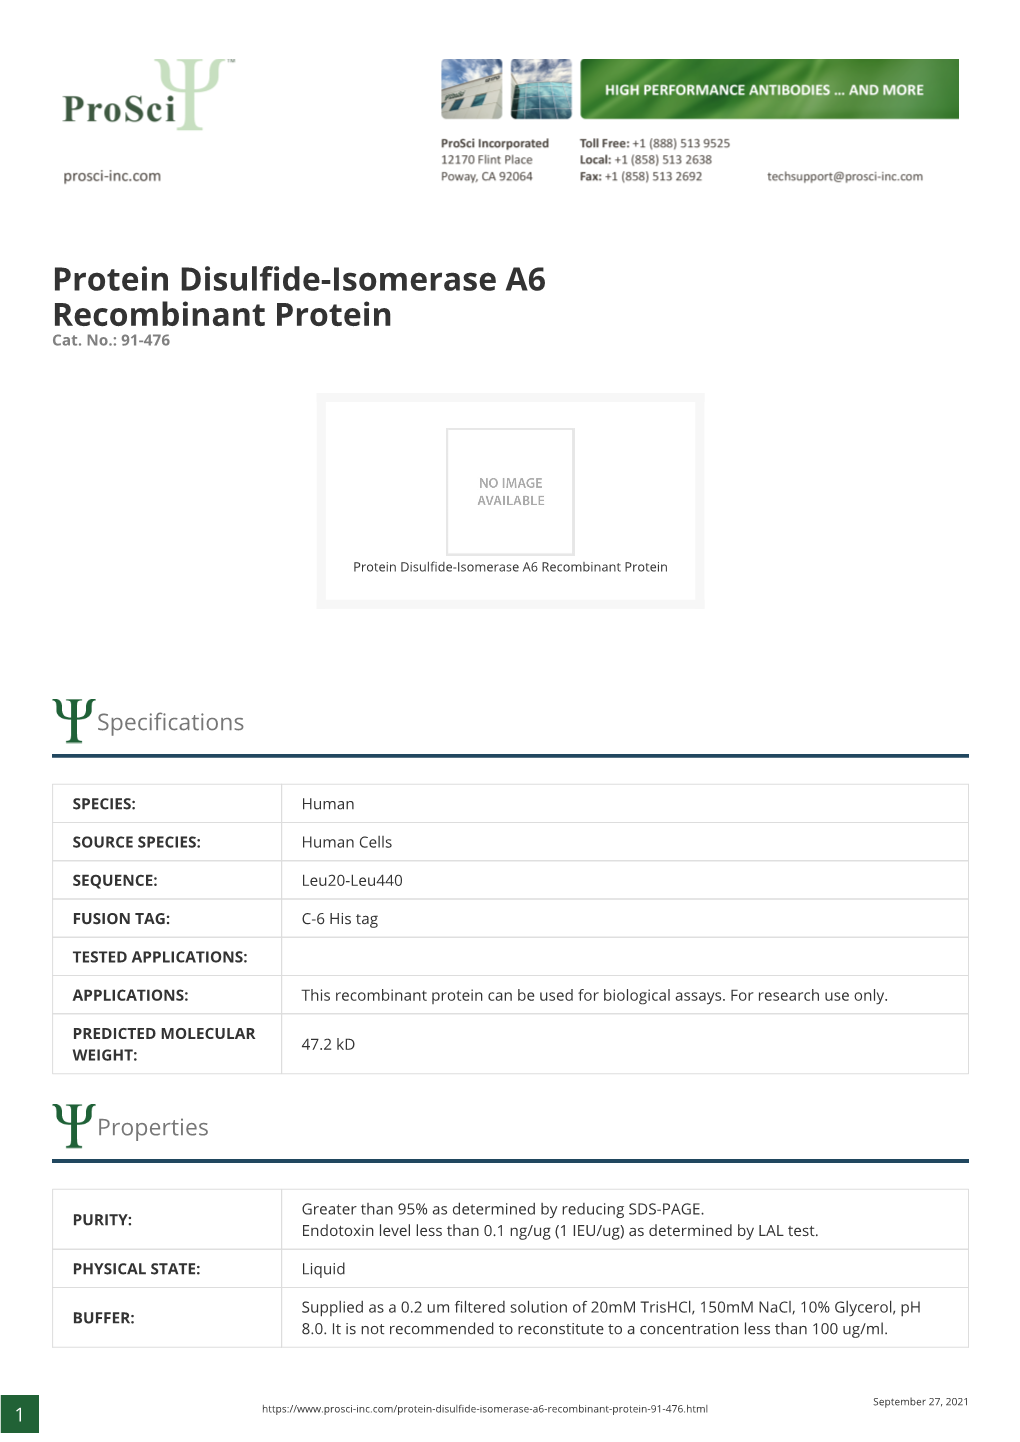 Protein Disulfide-Isomerase A6 Recombinant Protein Cat